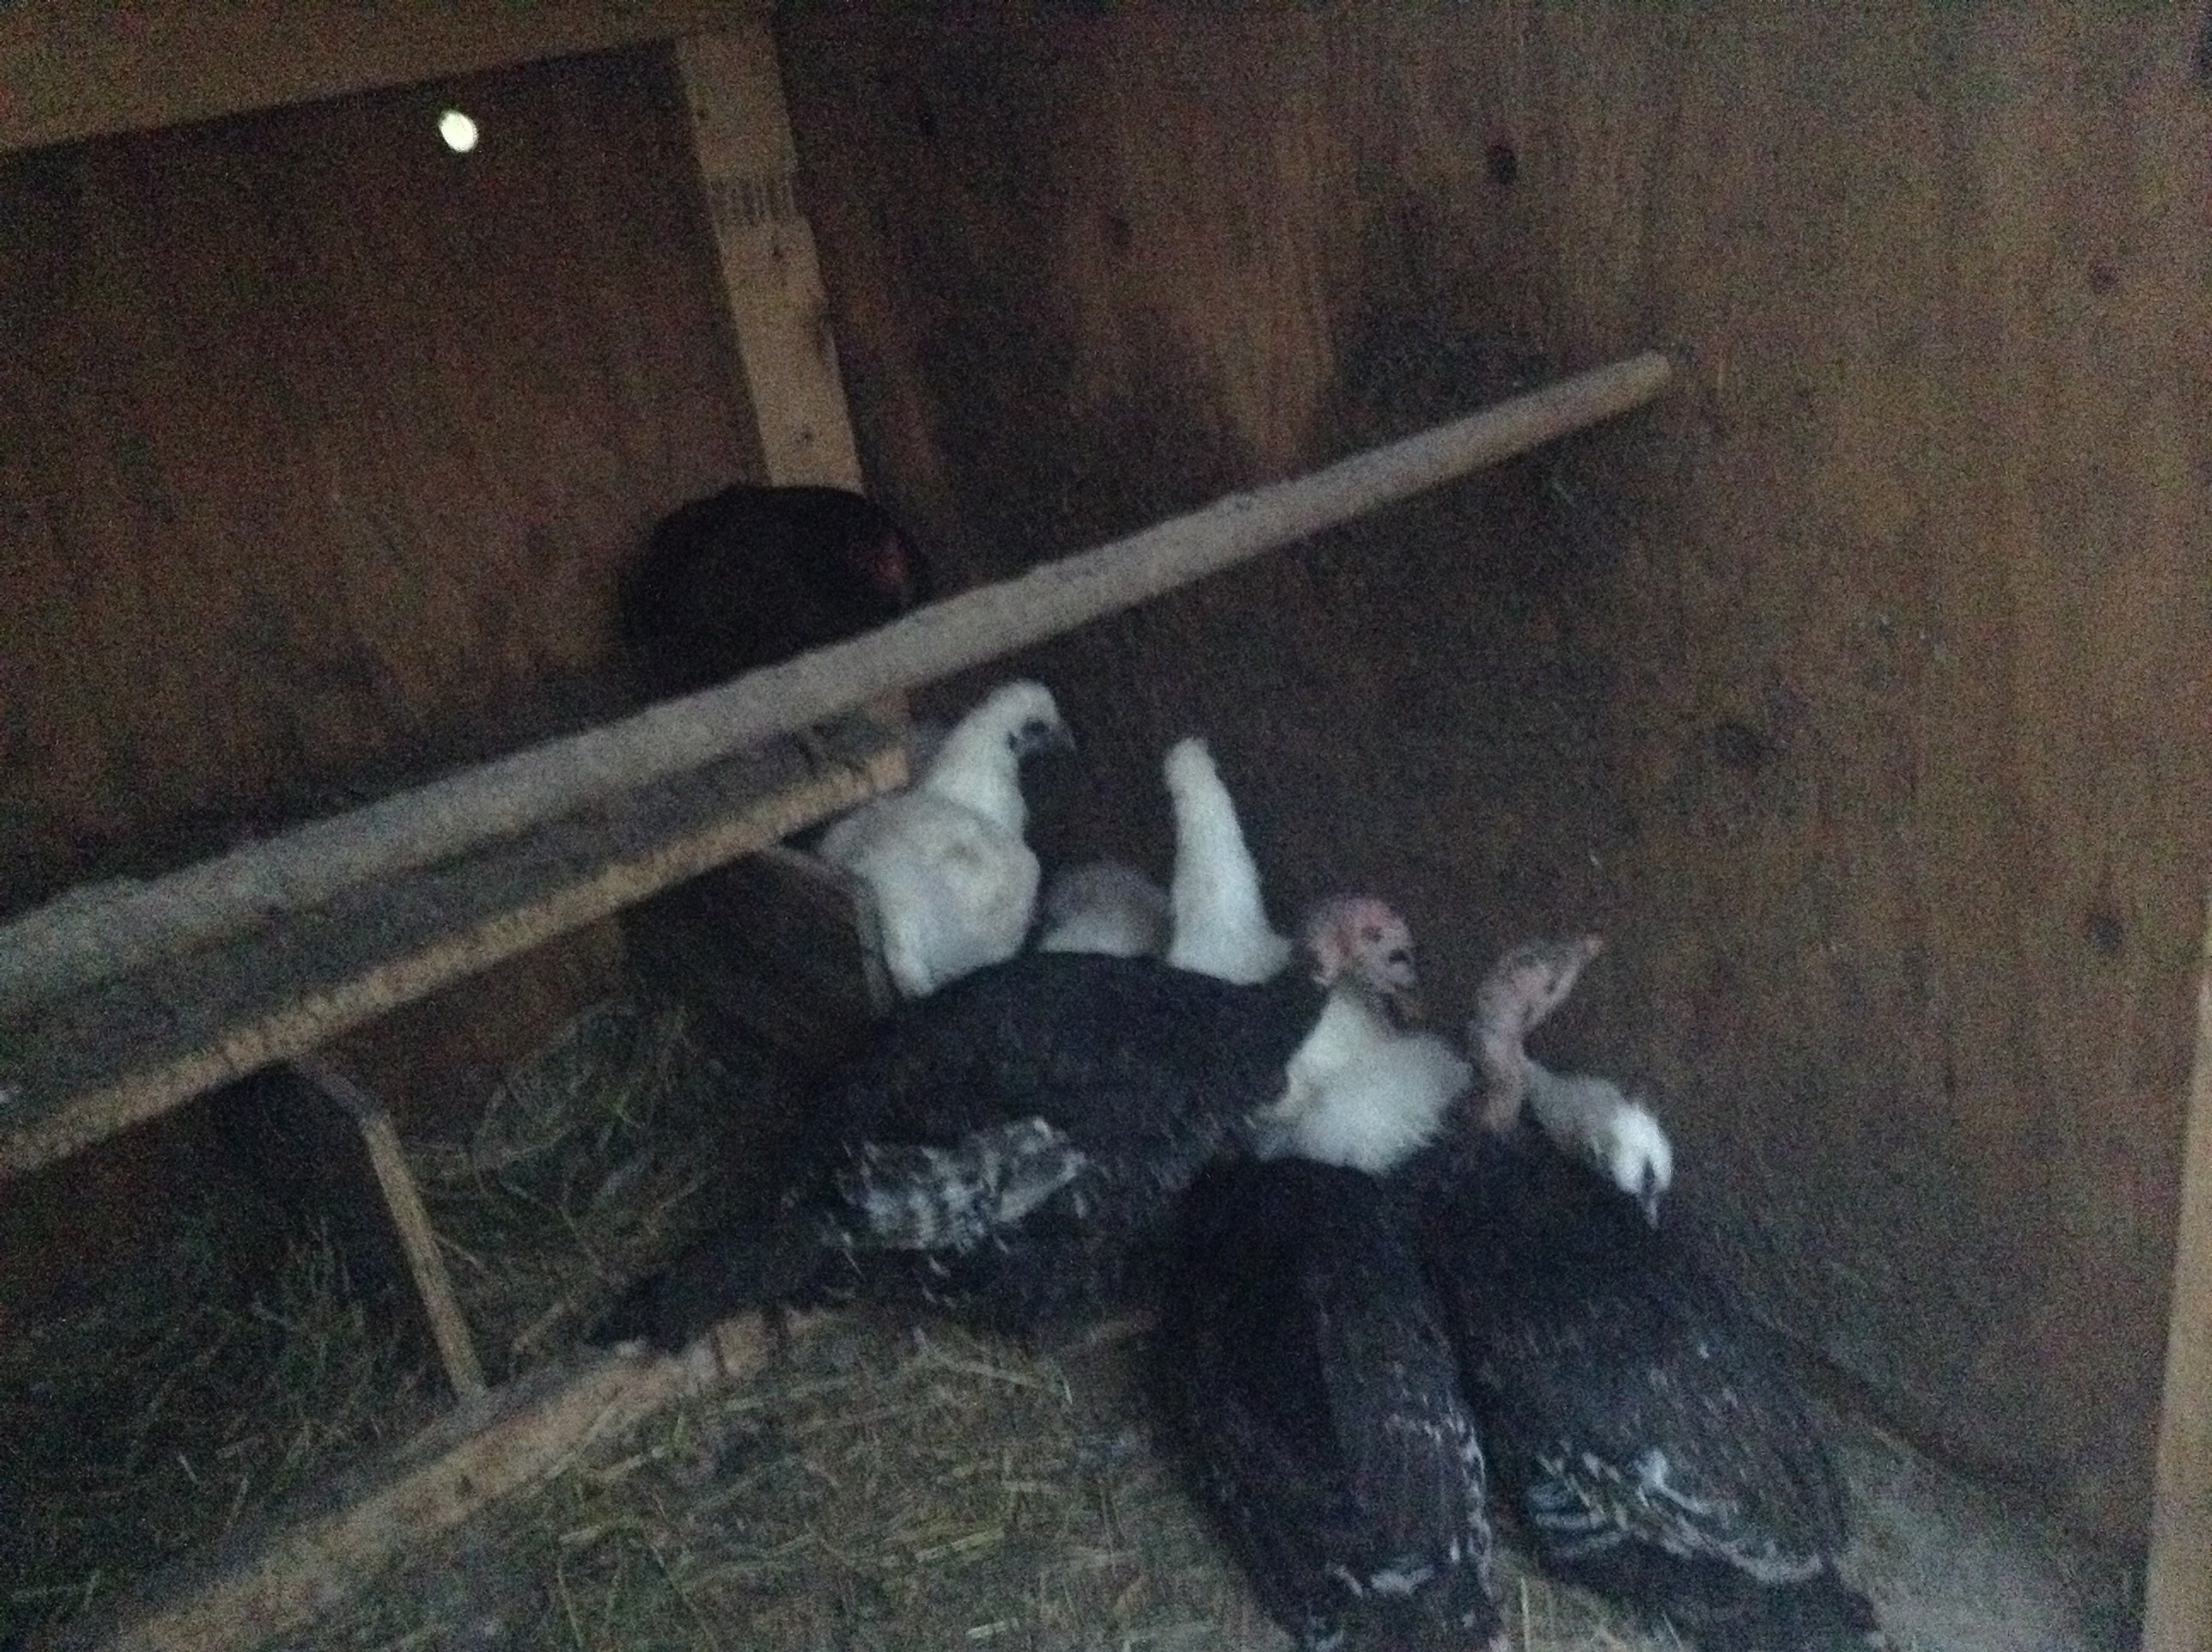 The once baby Silkies and turkeys making themselves a home in their new coop!